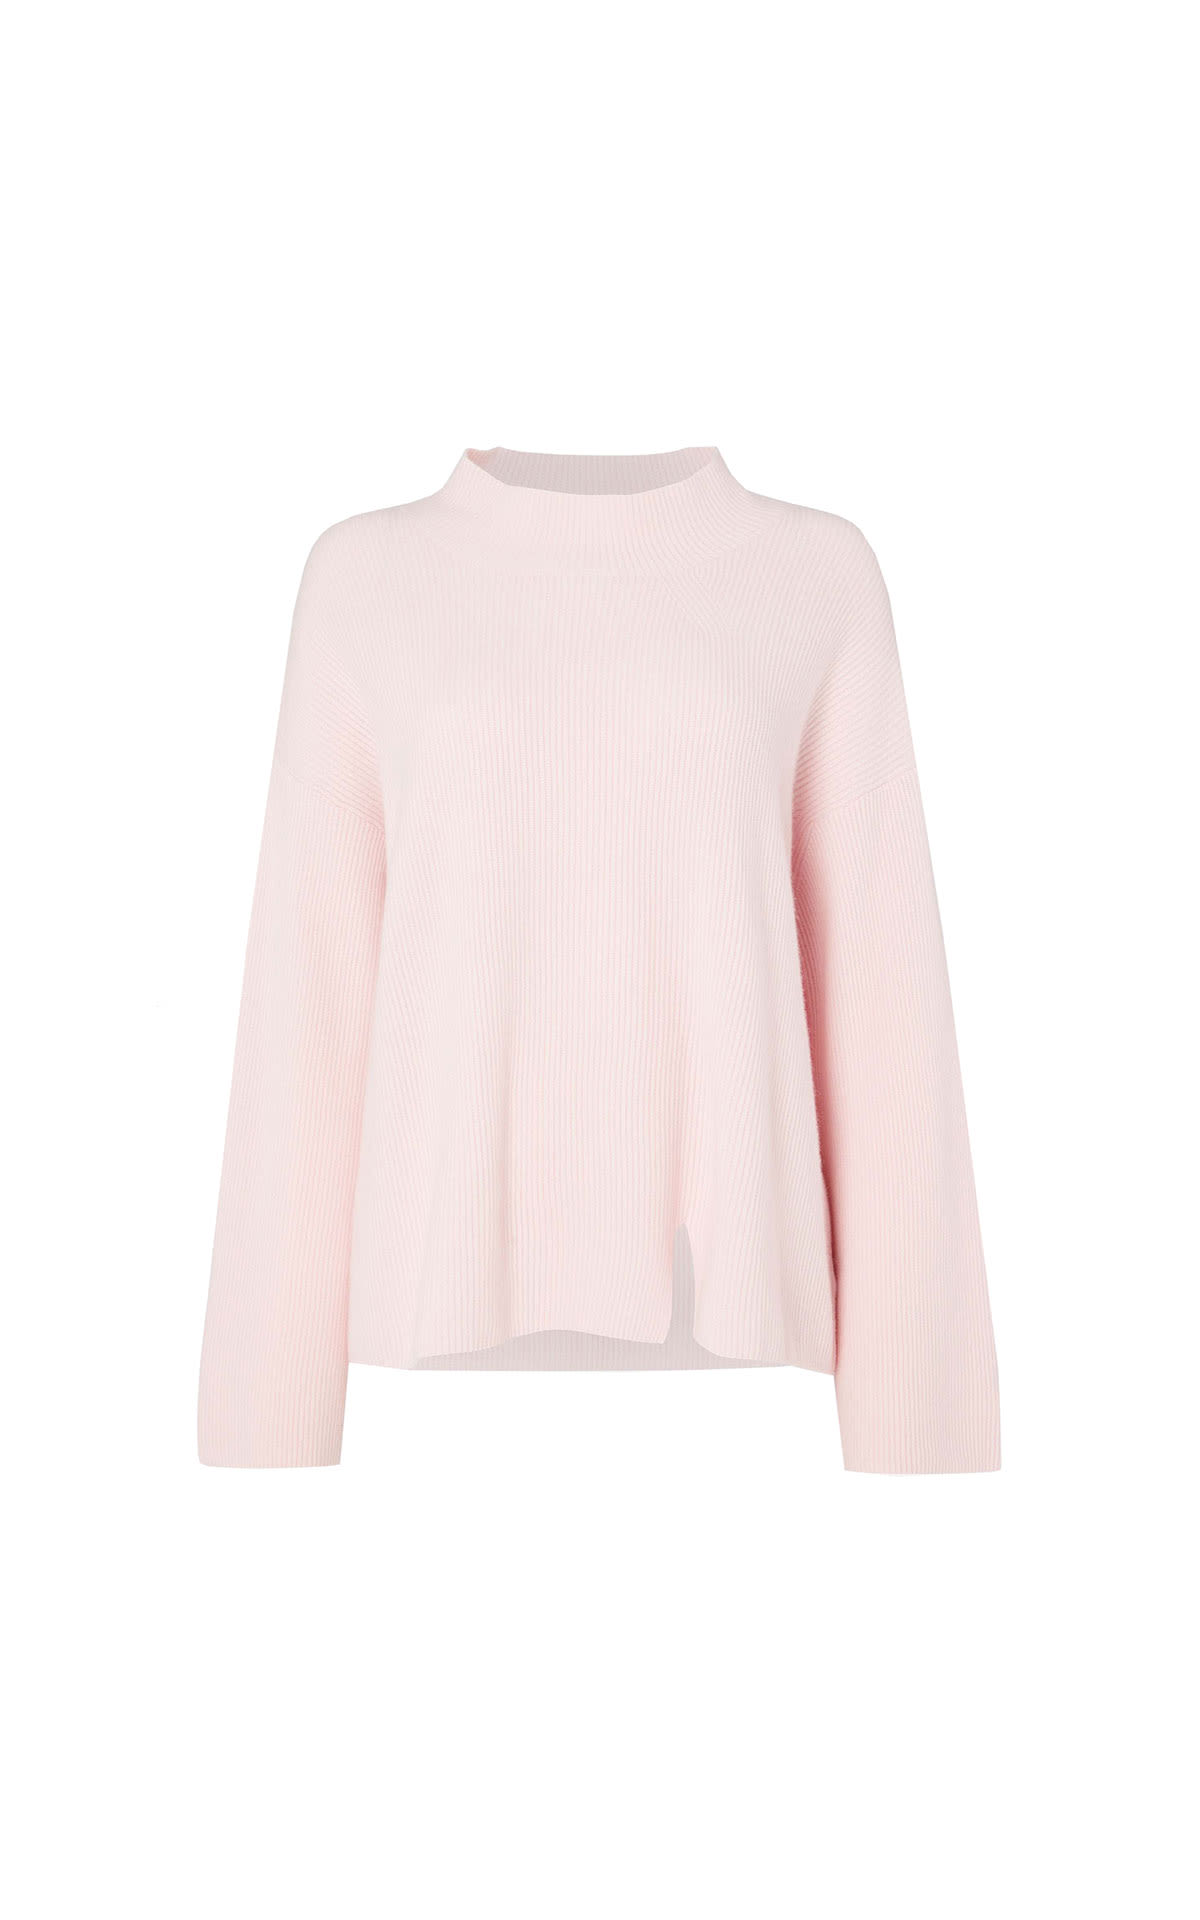 N.Peal Ladies cardigan stitch funnel neck from Bicester Village